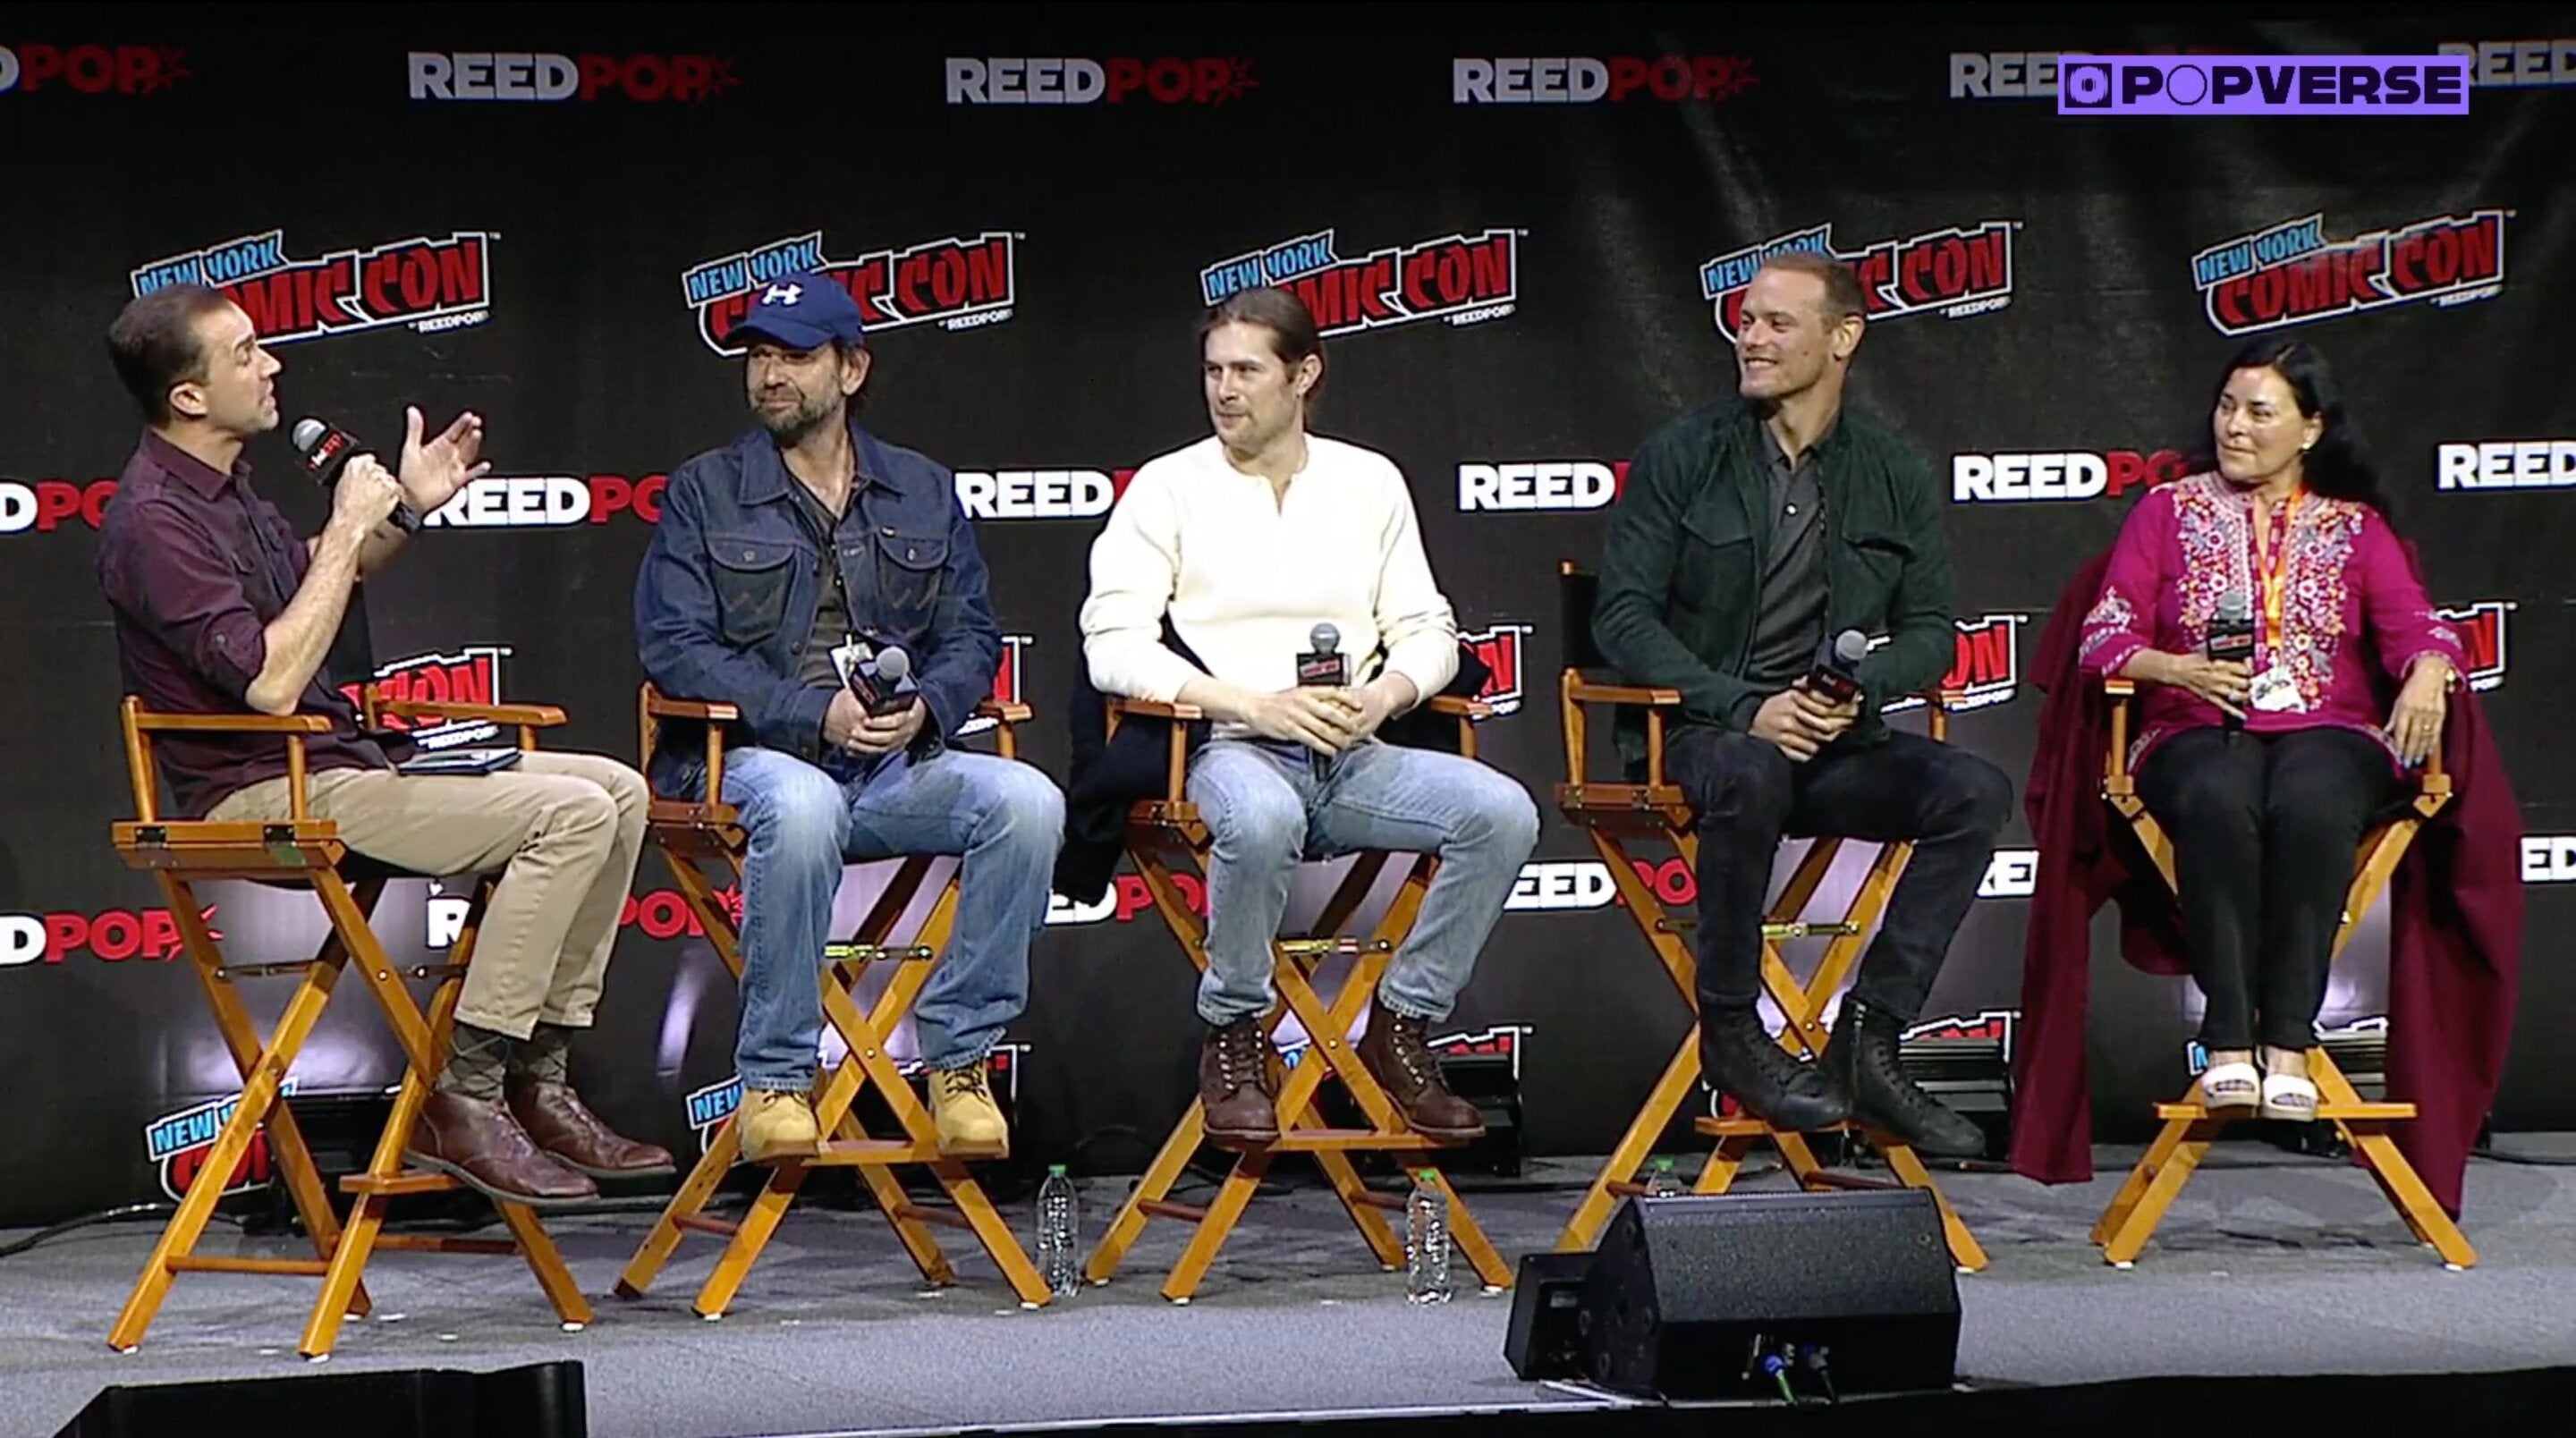 Image for Watch the Outlander panel from New York Comic Con with Sam Heughan, Duncan LaCroix, David Berry, and more